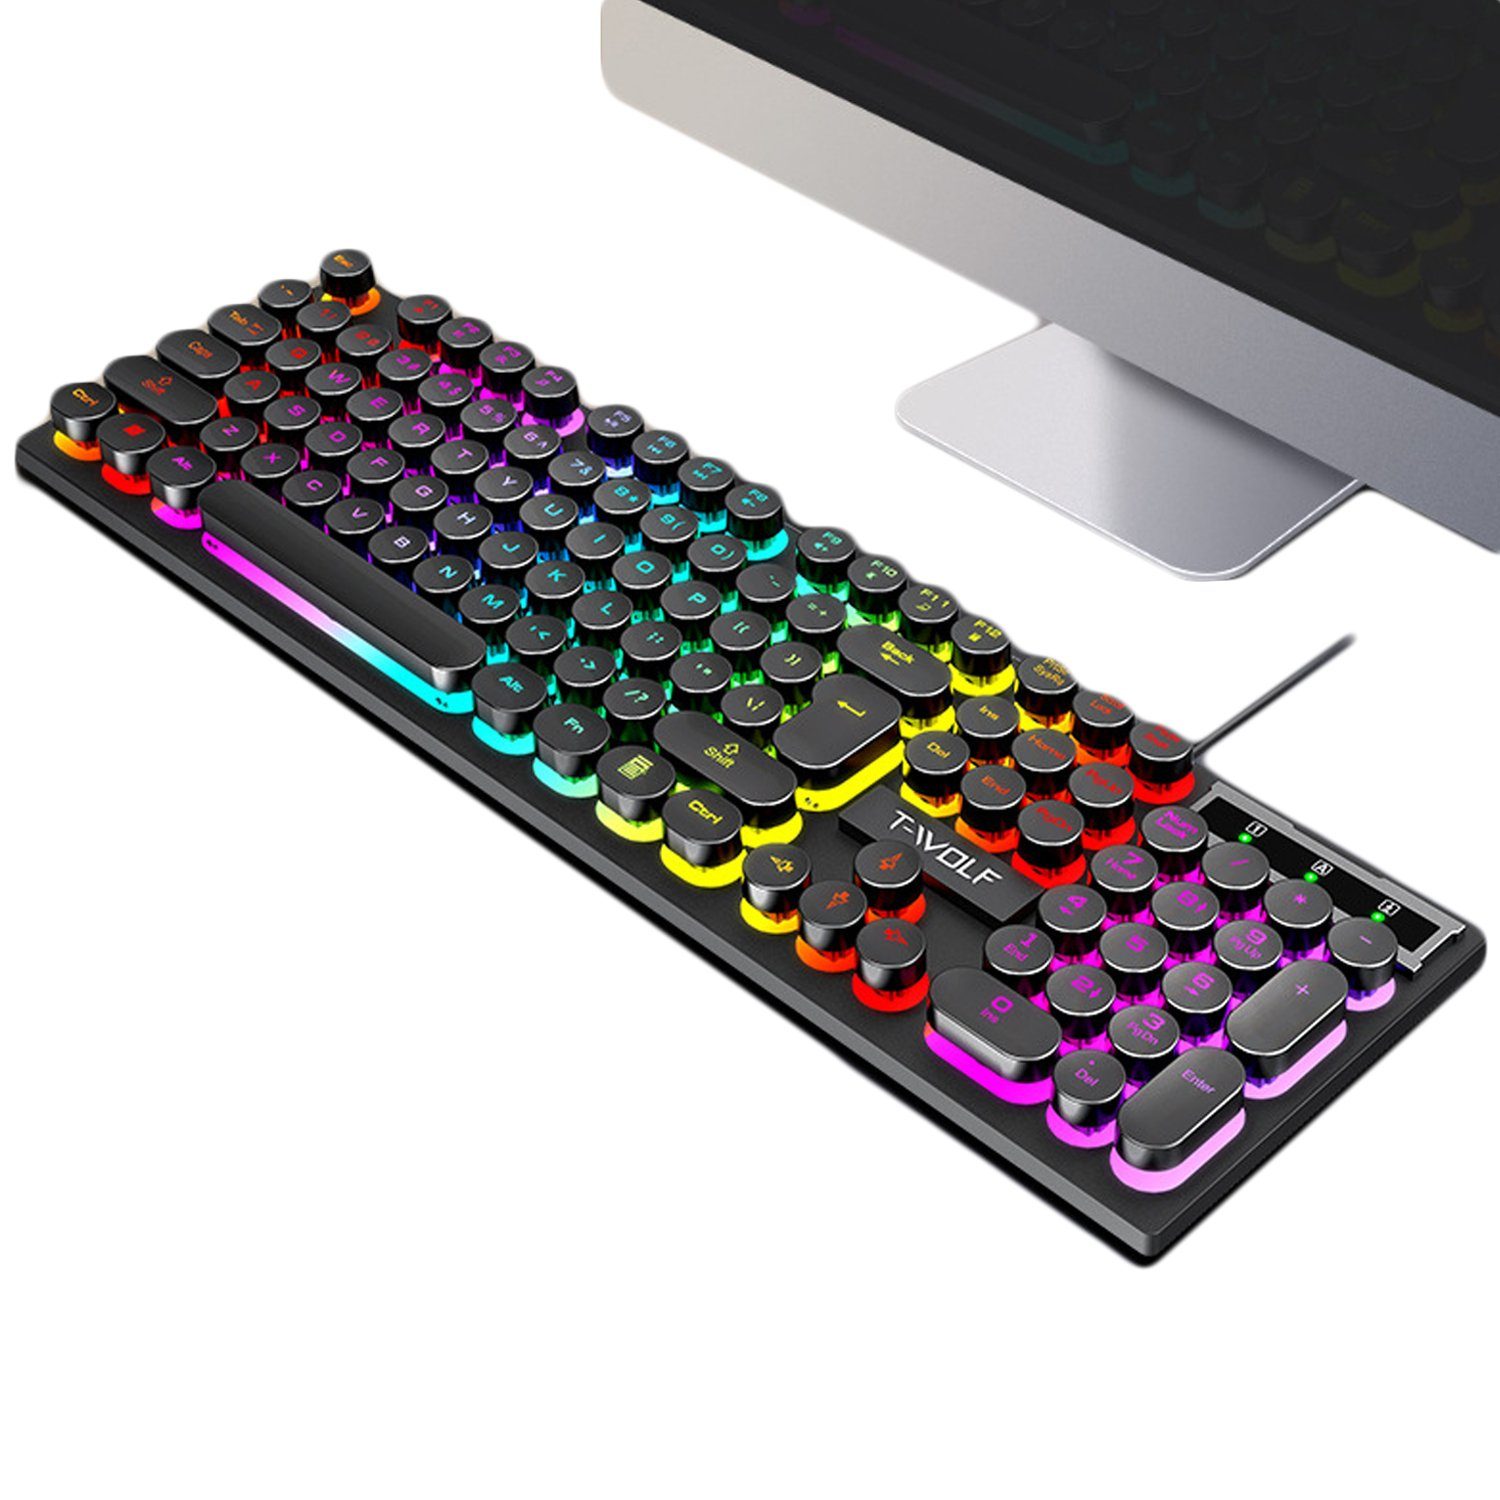 Gaming Keyboards&comma; PC Keyboards&comma; Competition Keyboards&comma; Black Gaming Keyboard &lpar;Wired Keyboard with LED Light for Gamers&sol;Workers 104 Keys&rpar;